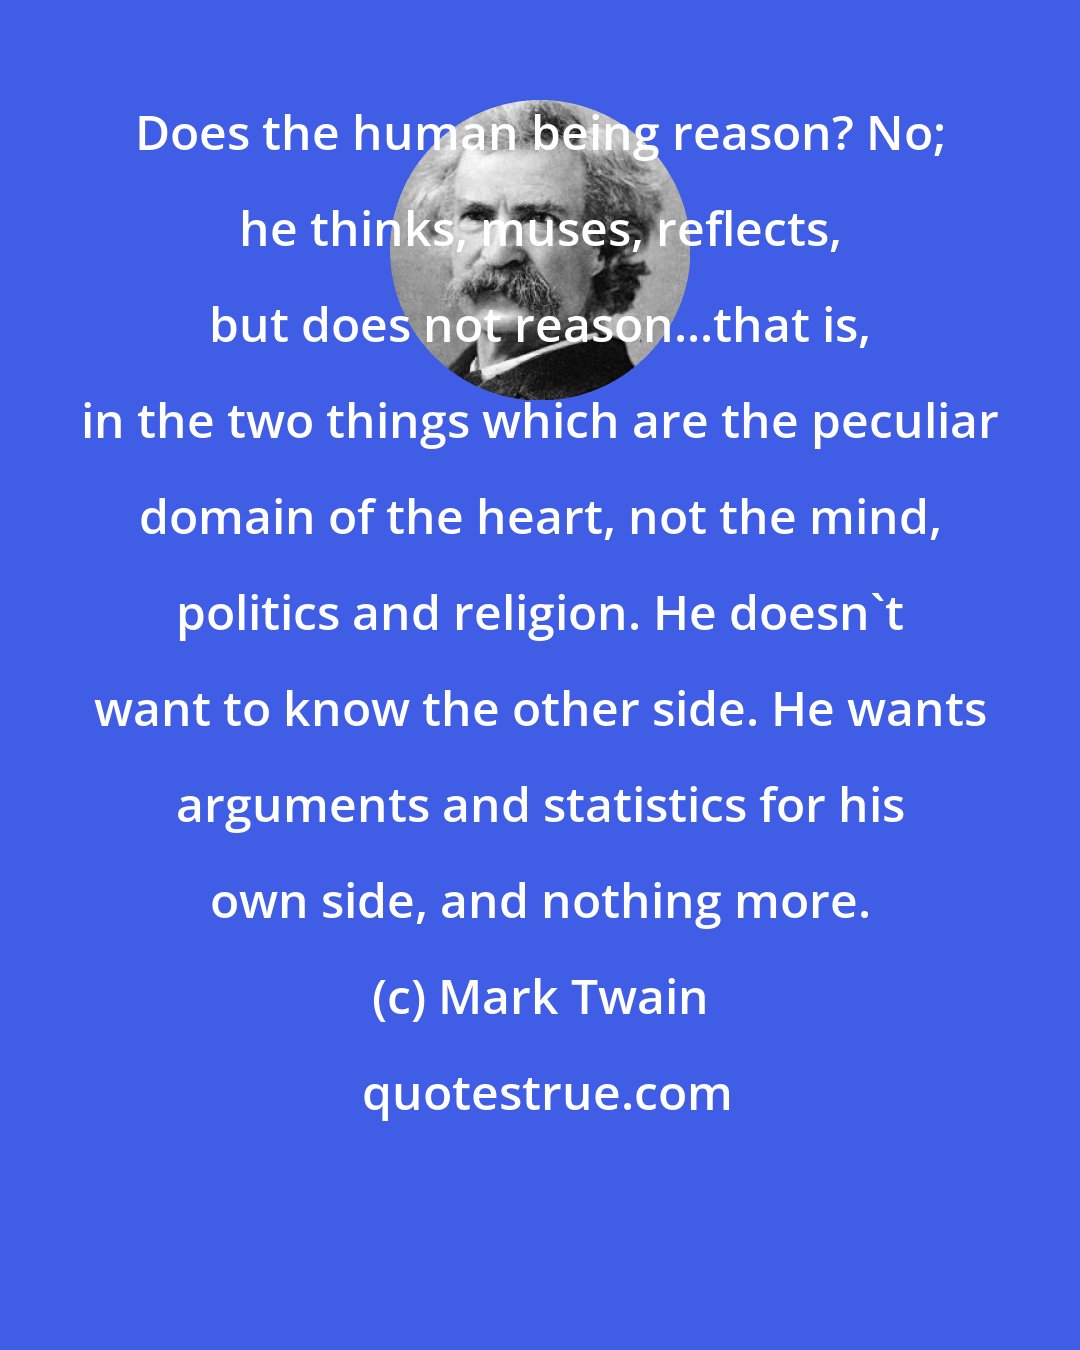 Mark Twain: Does the human being reason? No; he thinks, muses, reflects, but does not reason...that is, in the two things which are the peculiar domain of the heart, not the mind, politics and religion. He doesn't want to know the other side. He wants arguments and statistics for his own side, and nothing more.